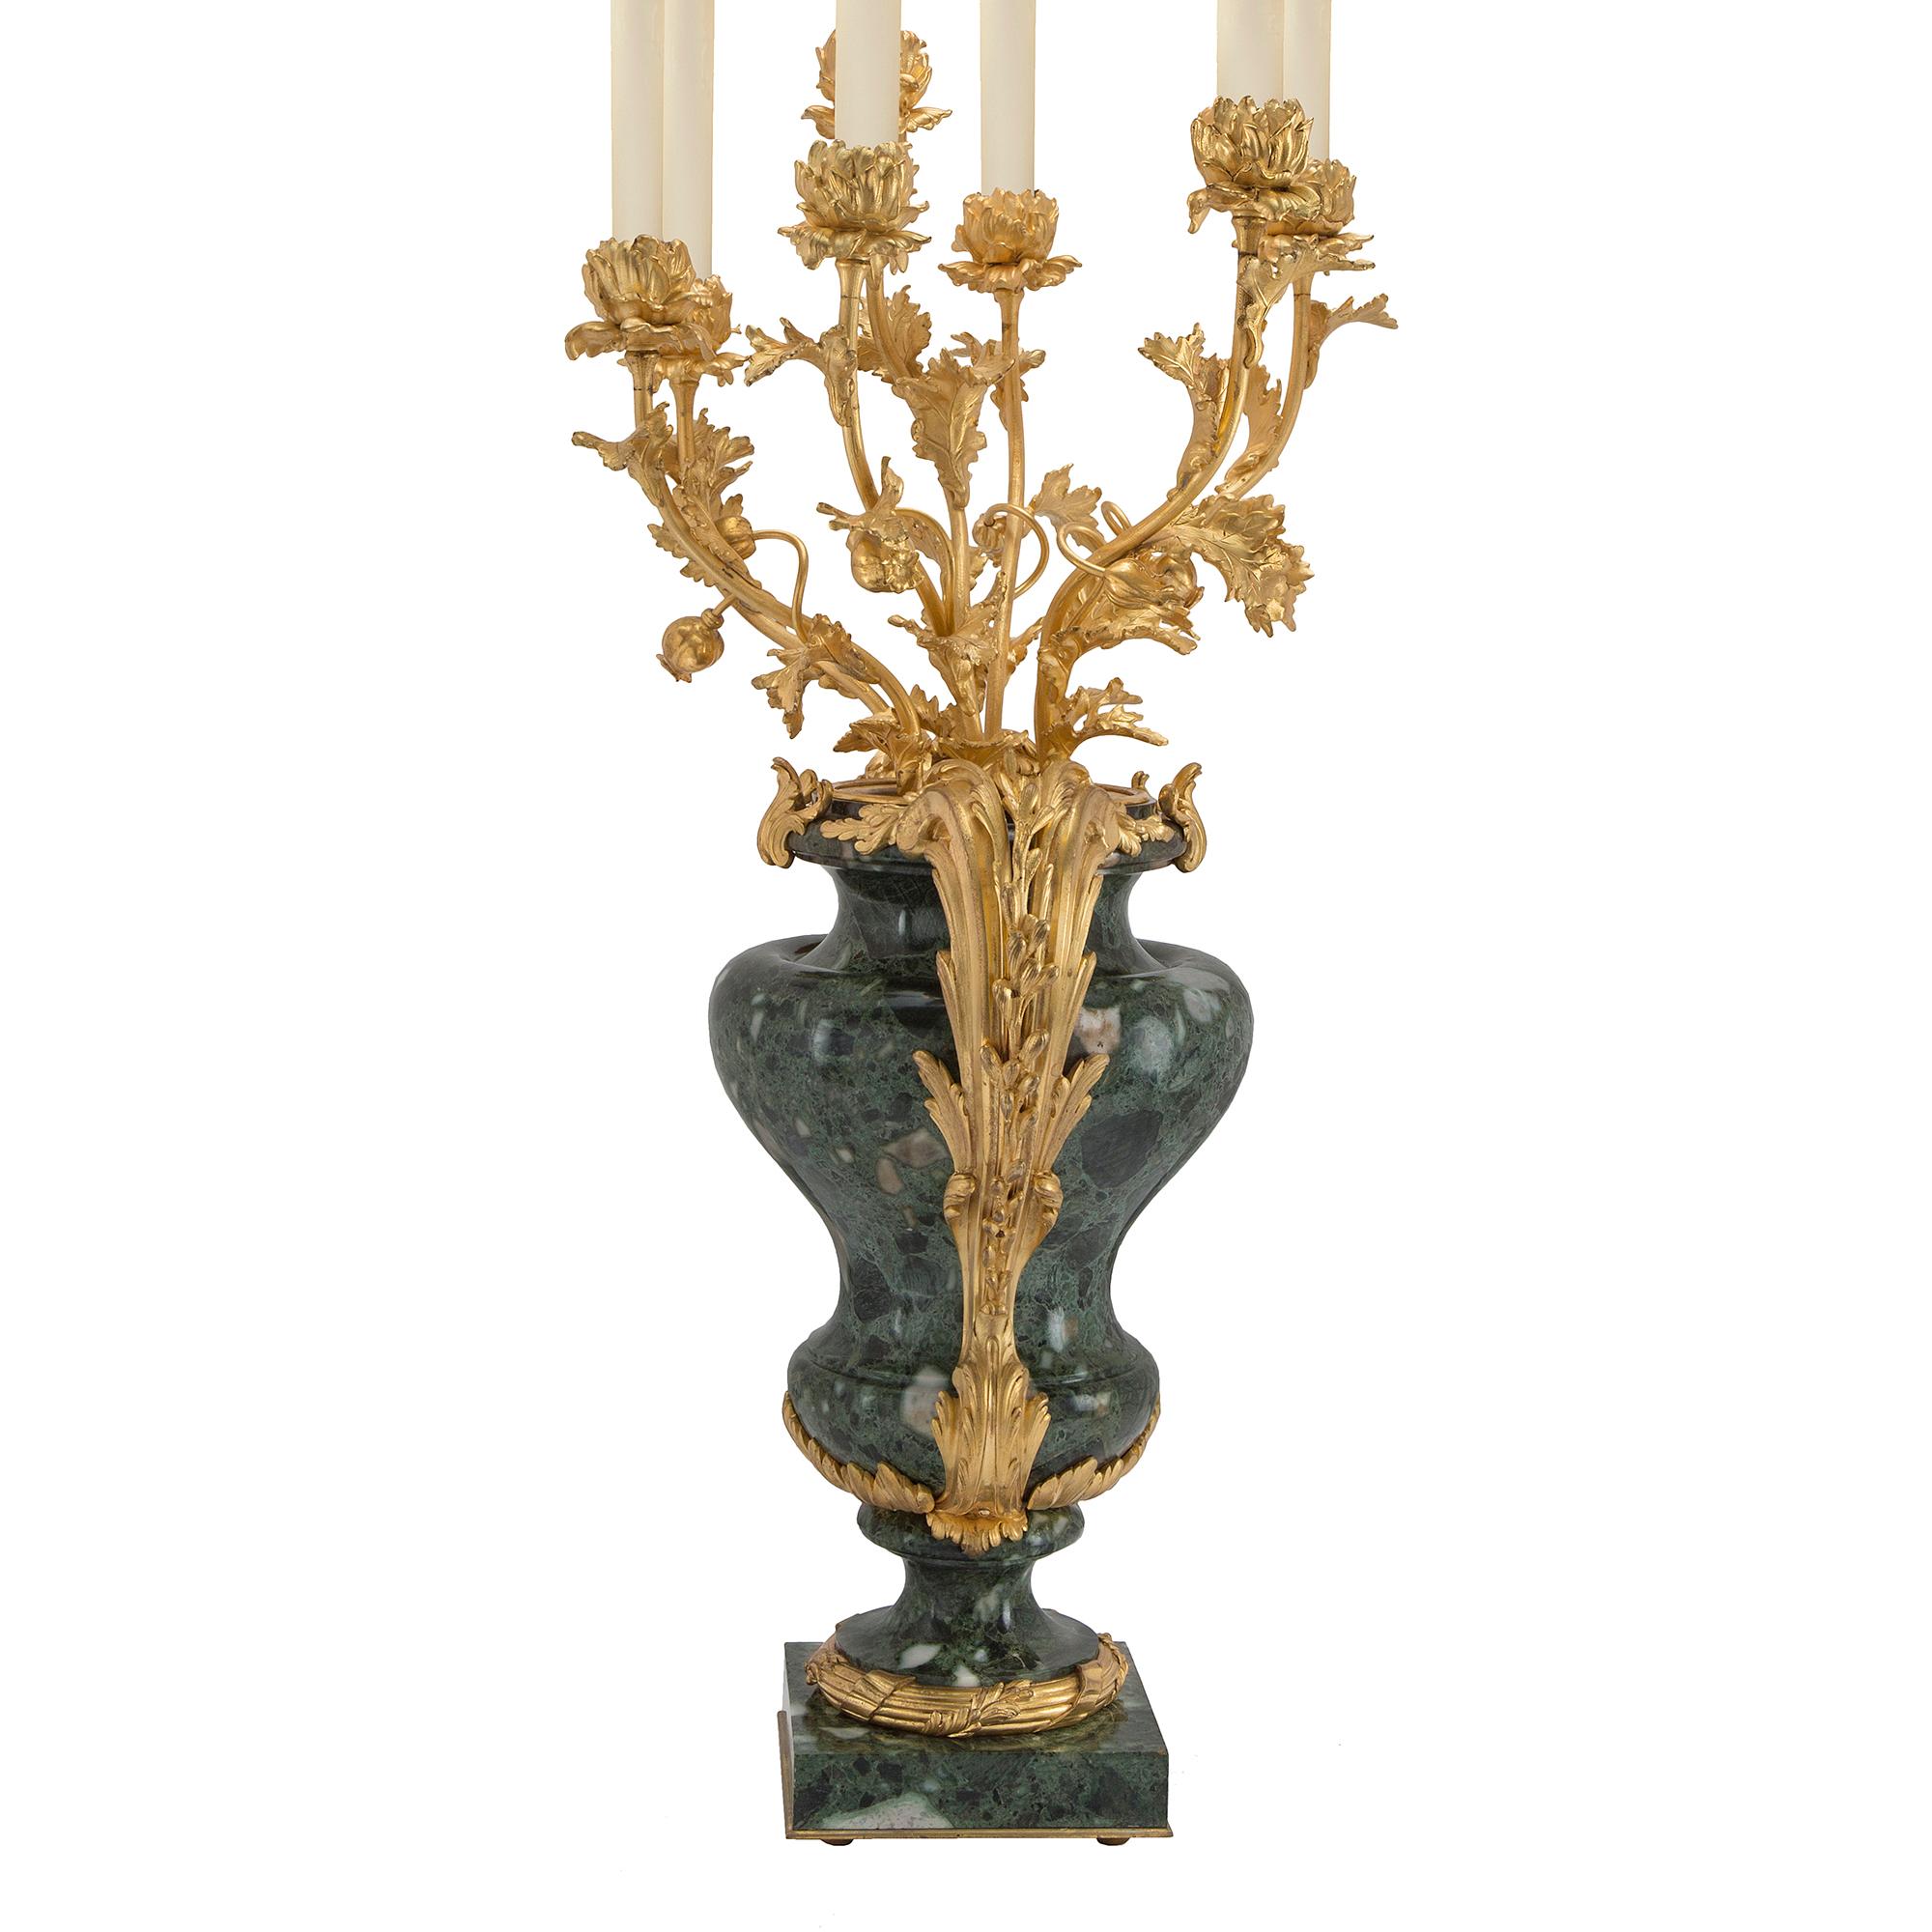 Ormolu Pair of French Mid-19th Century Louis XVI Style Mounted Candelabras For Sale